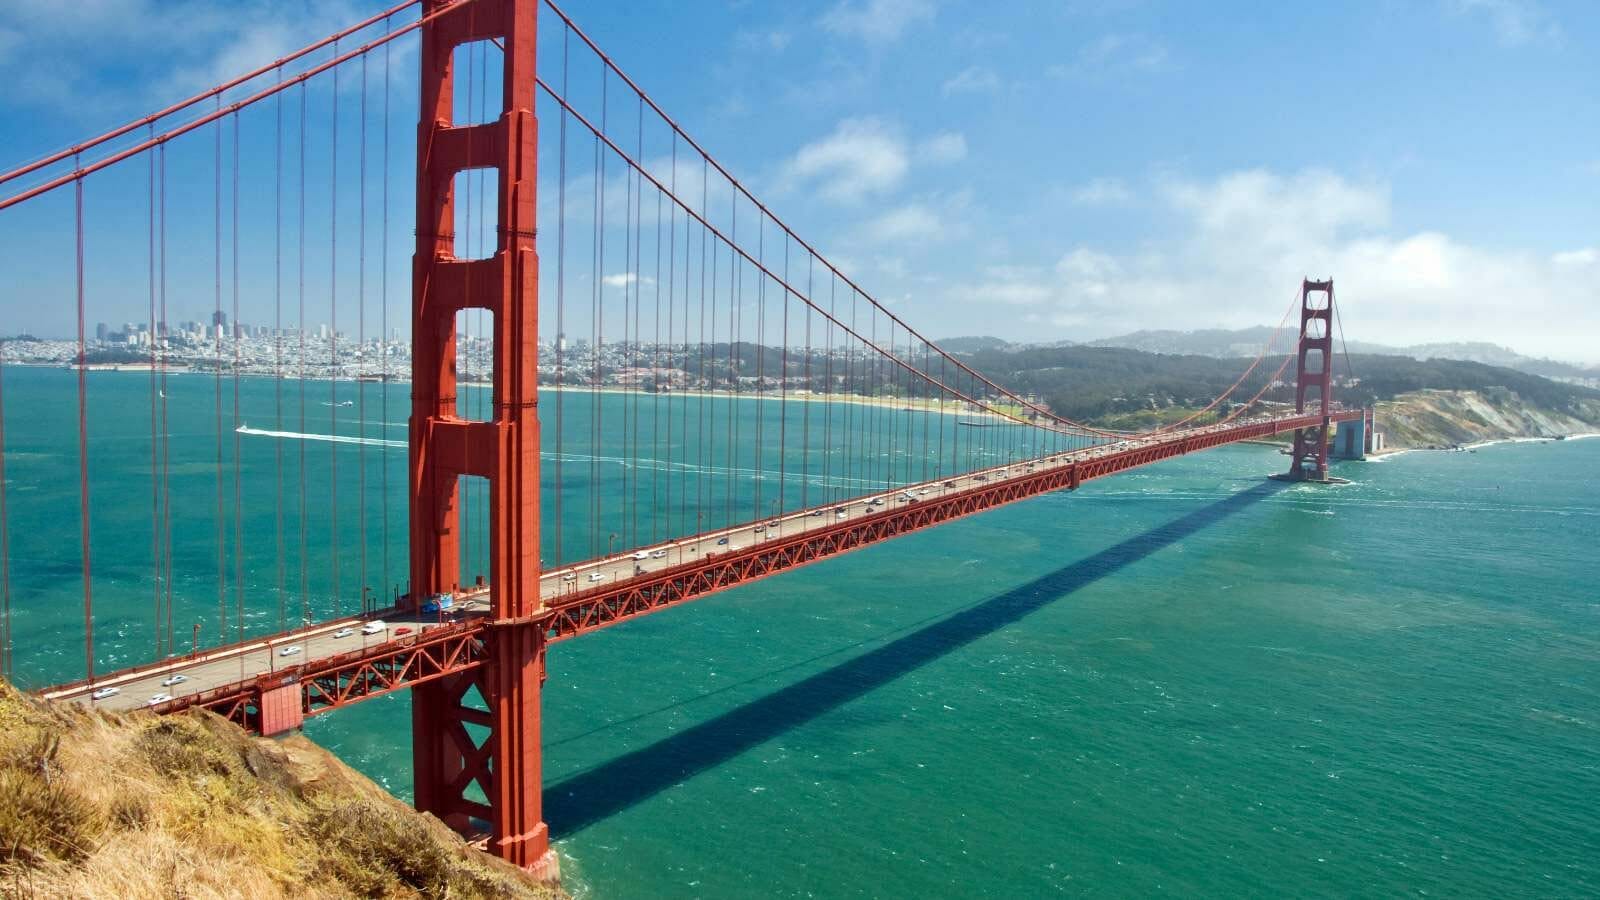 <p>The Golden Gate Bridge is one of the most iconic landmarks in the United States. It’s a beautiful suspension bridge that spans the Golden Gate strait, connecting San Francisco to Marin County.</p>